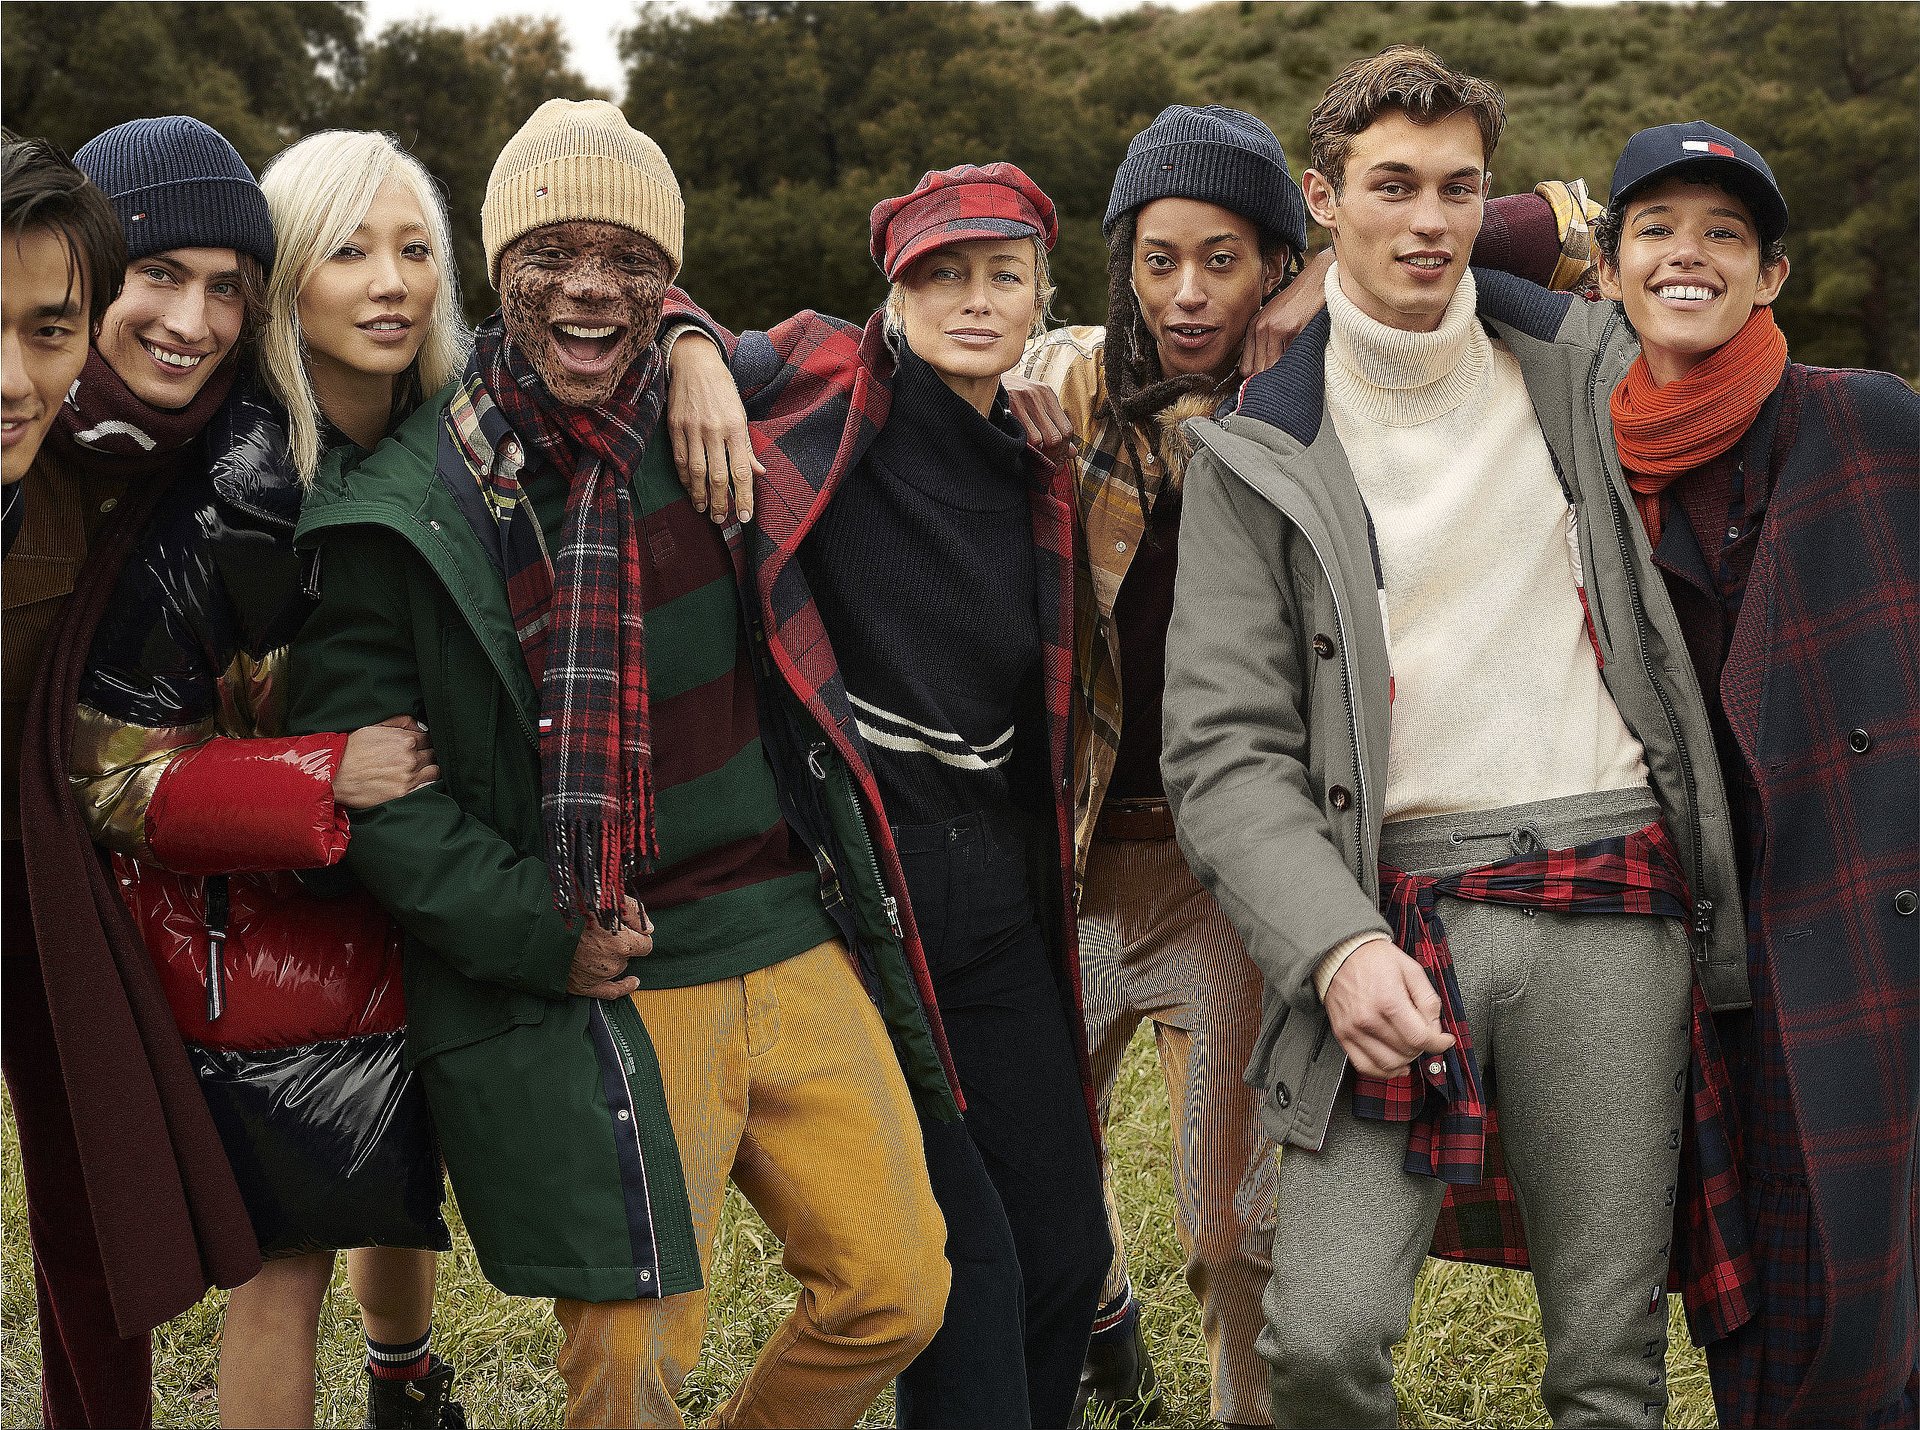 Hilfiger presents the "TOMMY ICONS" collection for autumn 2020 | Haut Fashion